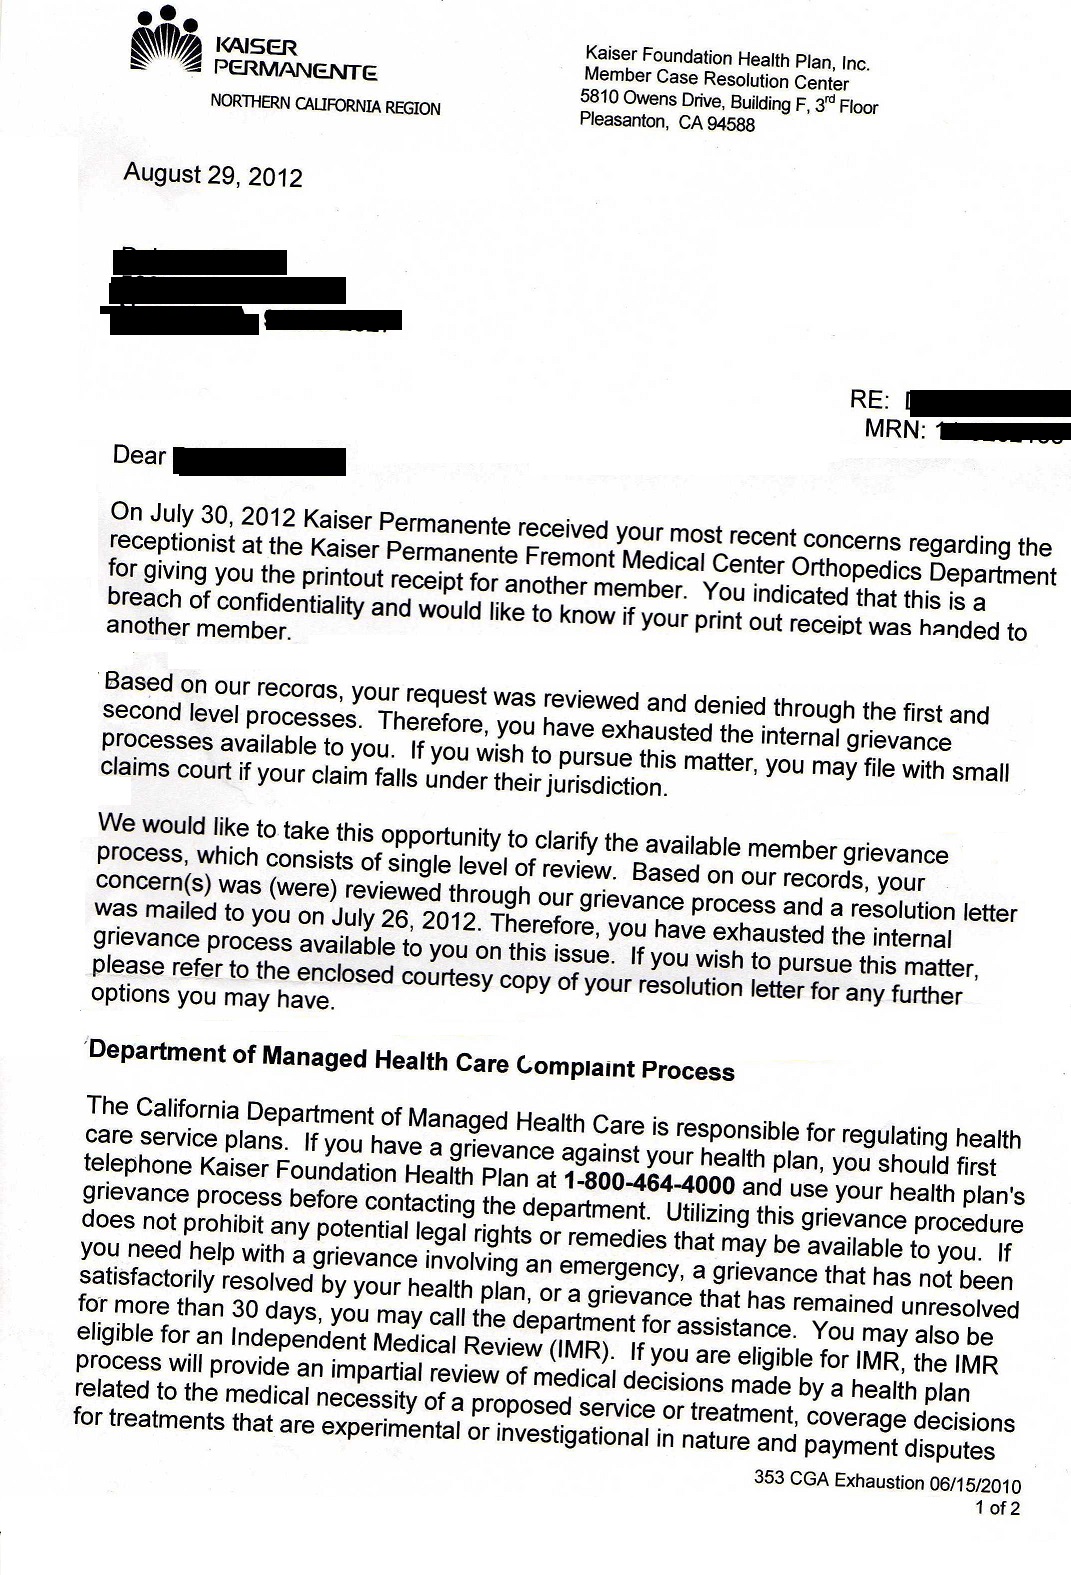 Letter dated August 29, 2012 More lies